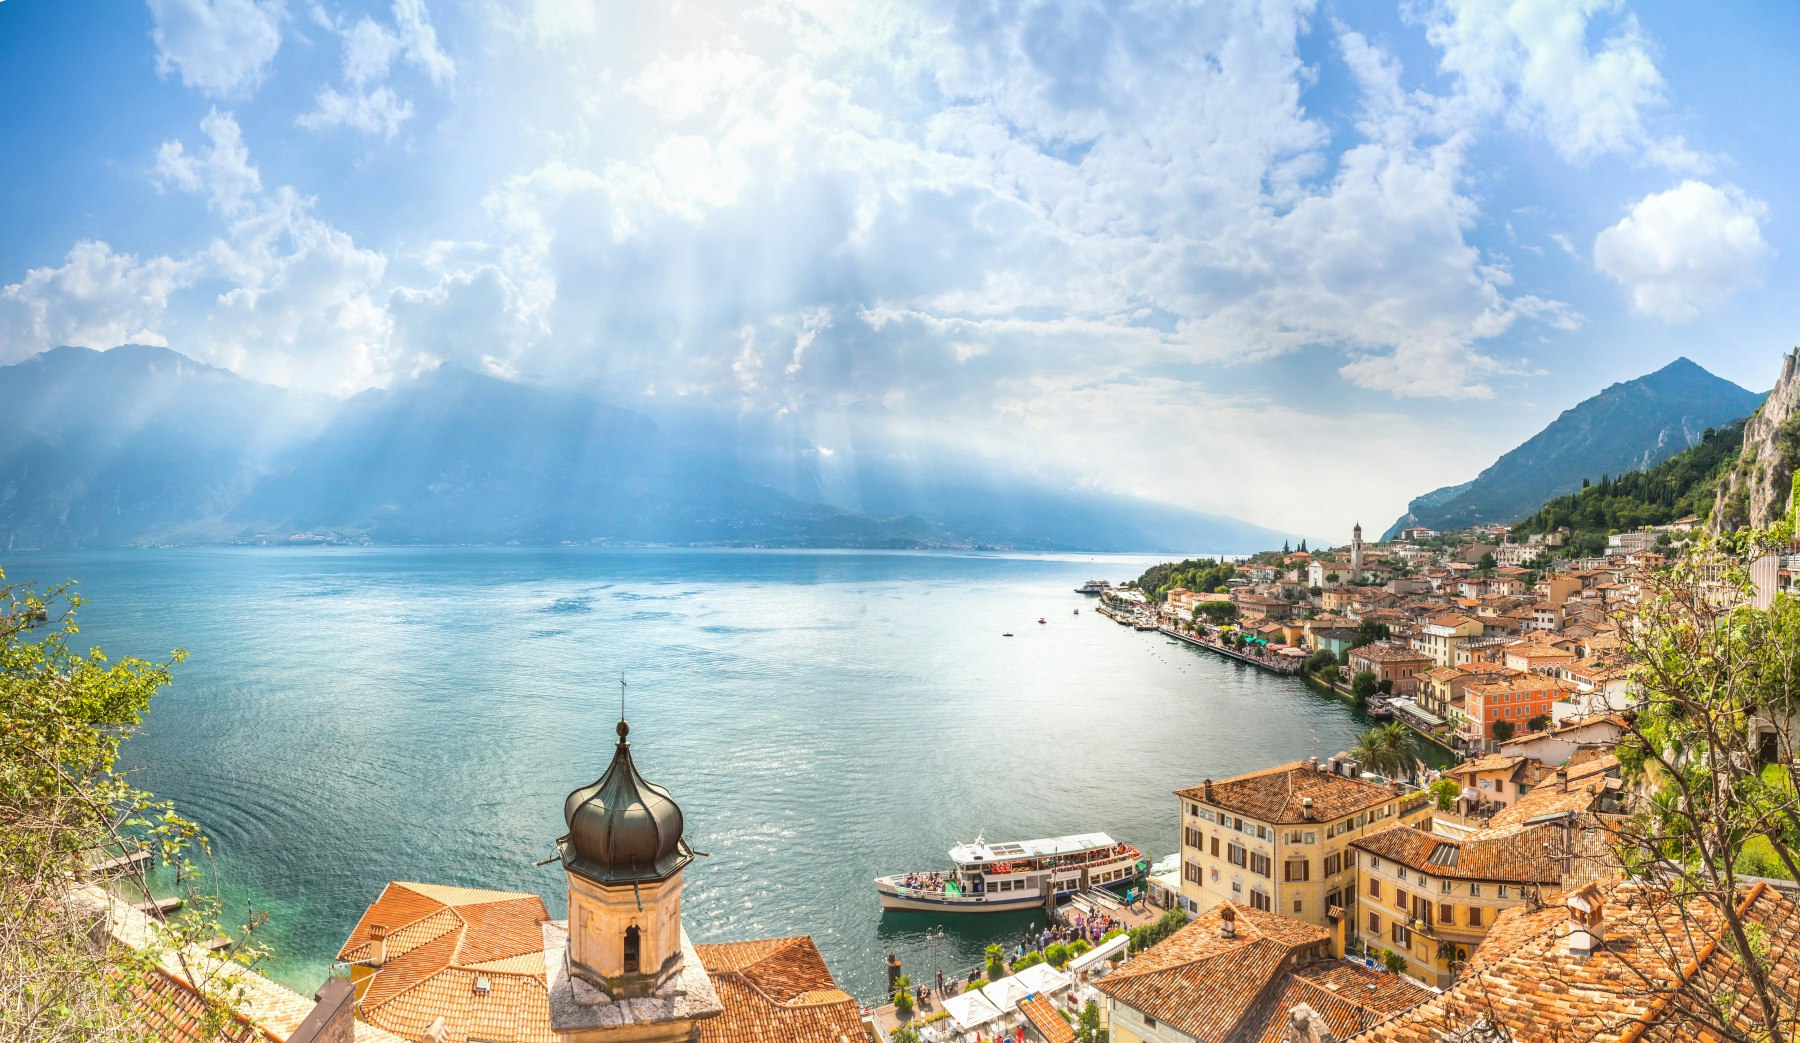 An overview of a lakeside village on Lake Garda